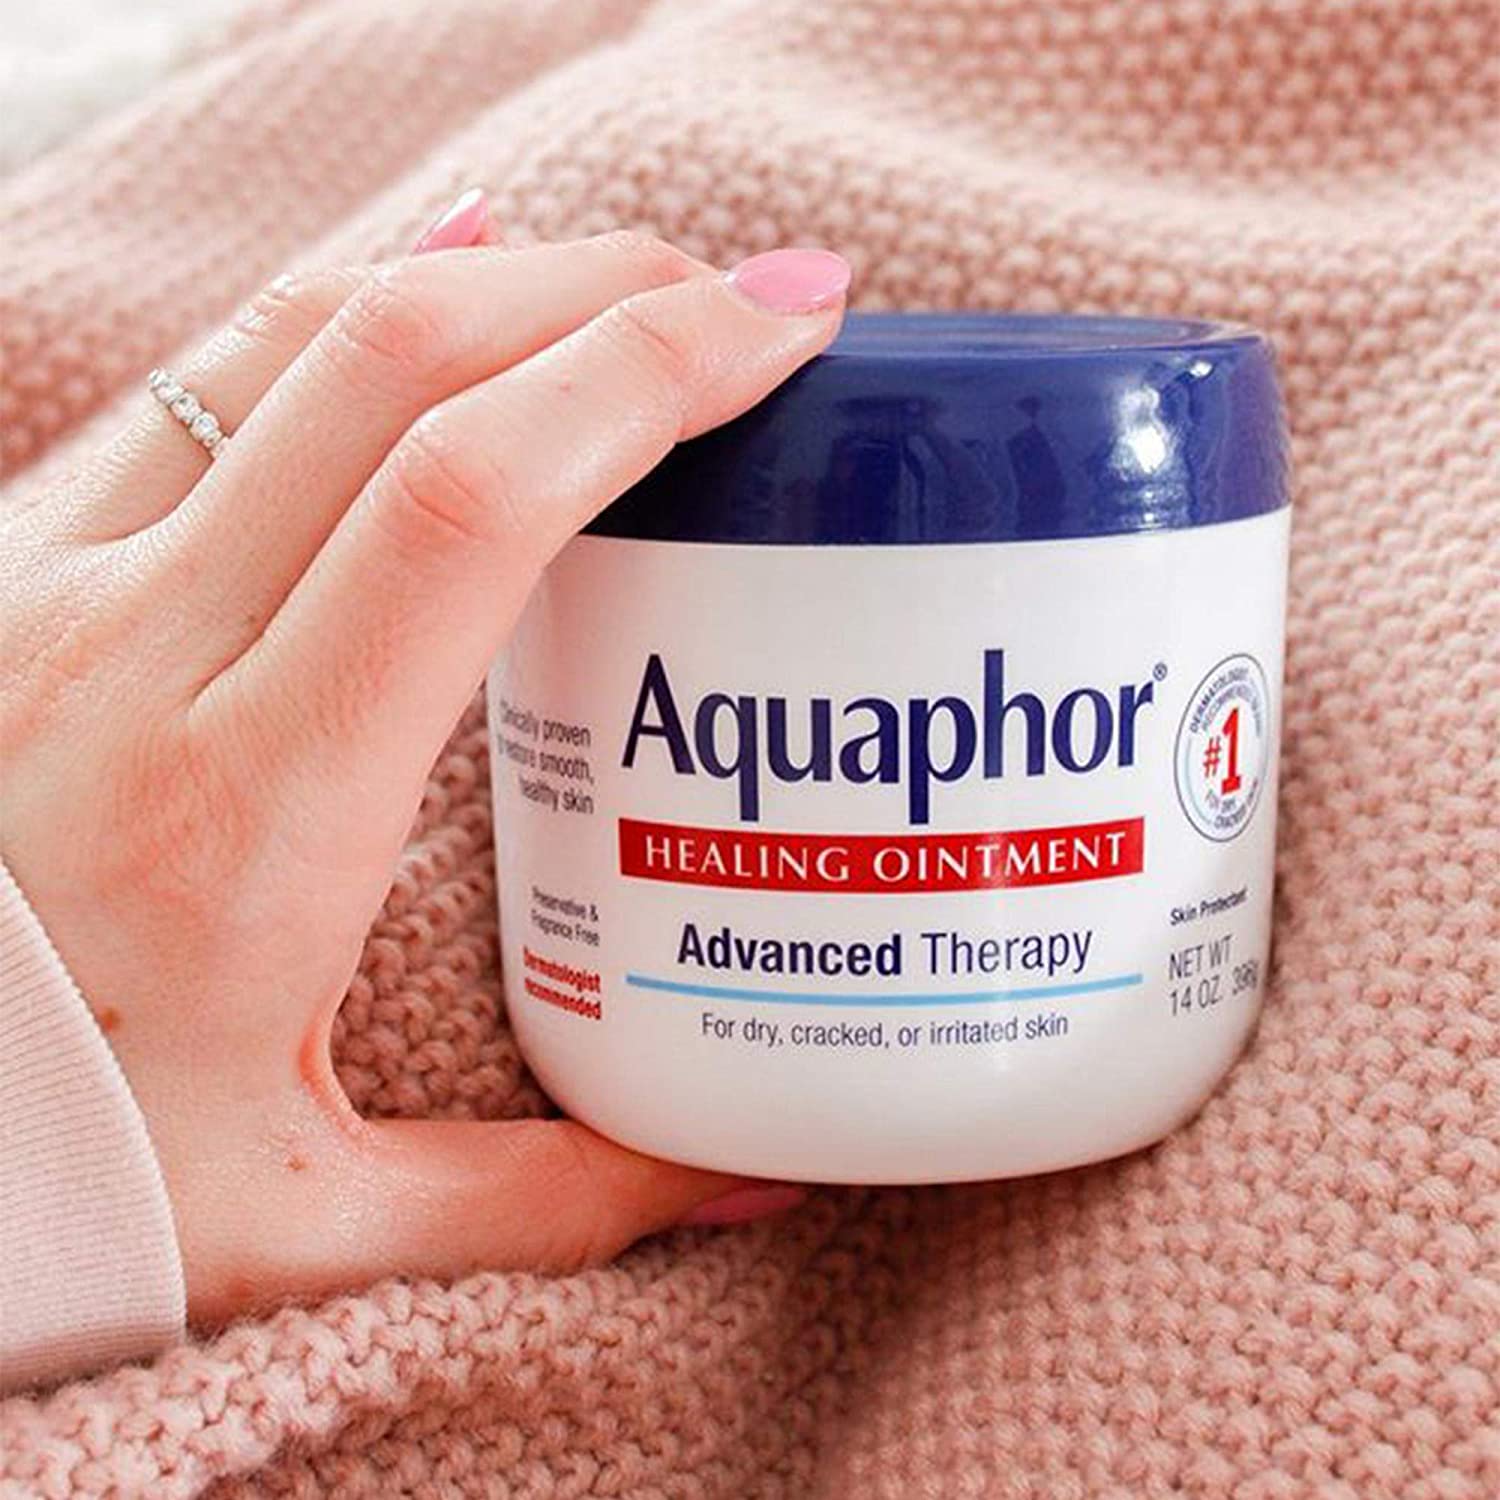 Aquaphor Healing Ointment - Moisturizing Skin Protectant for Dry Cracked Hands, Heels and Elbows, Use After Hand Washing - 14 oz. Jar - image 4 of 4